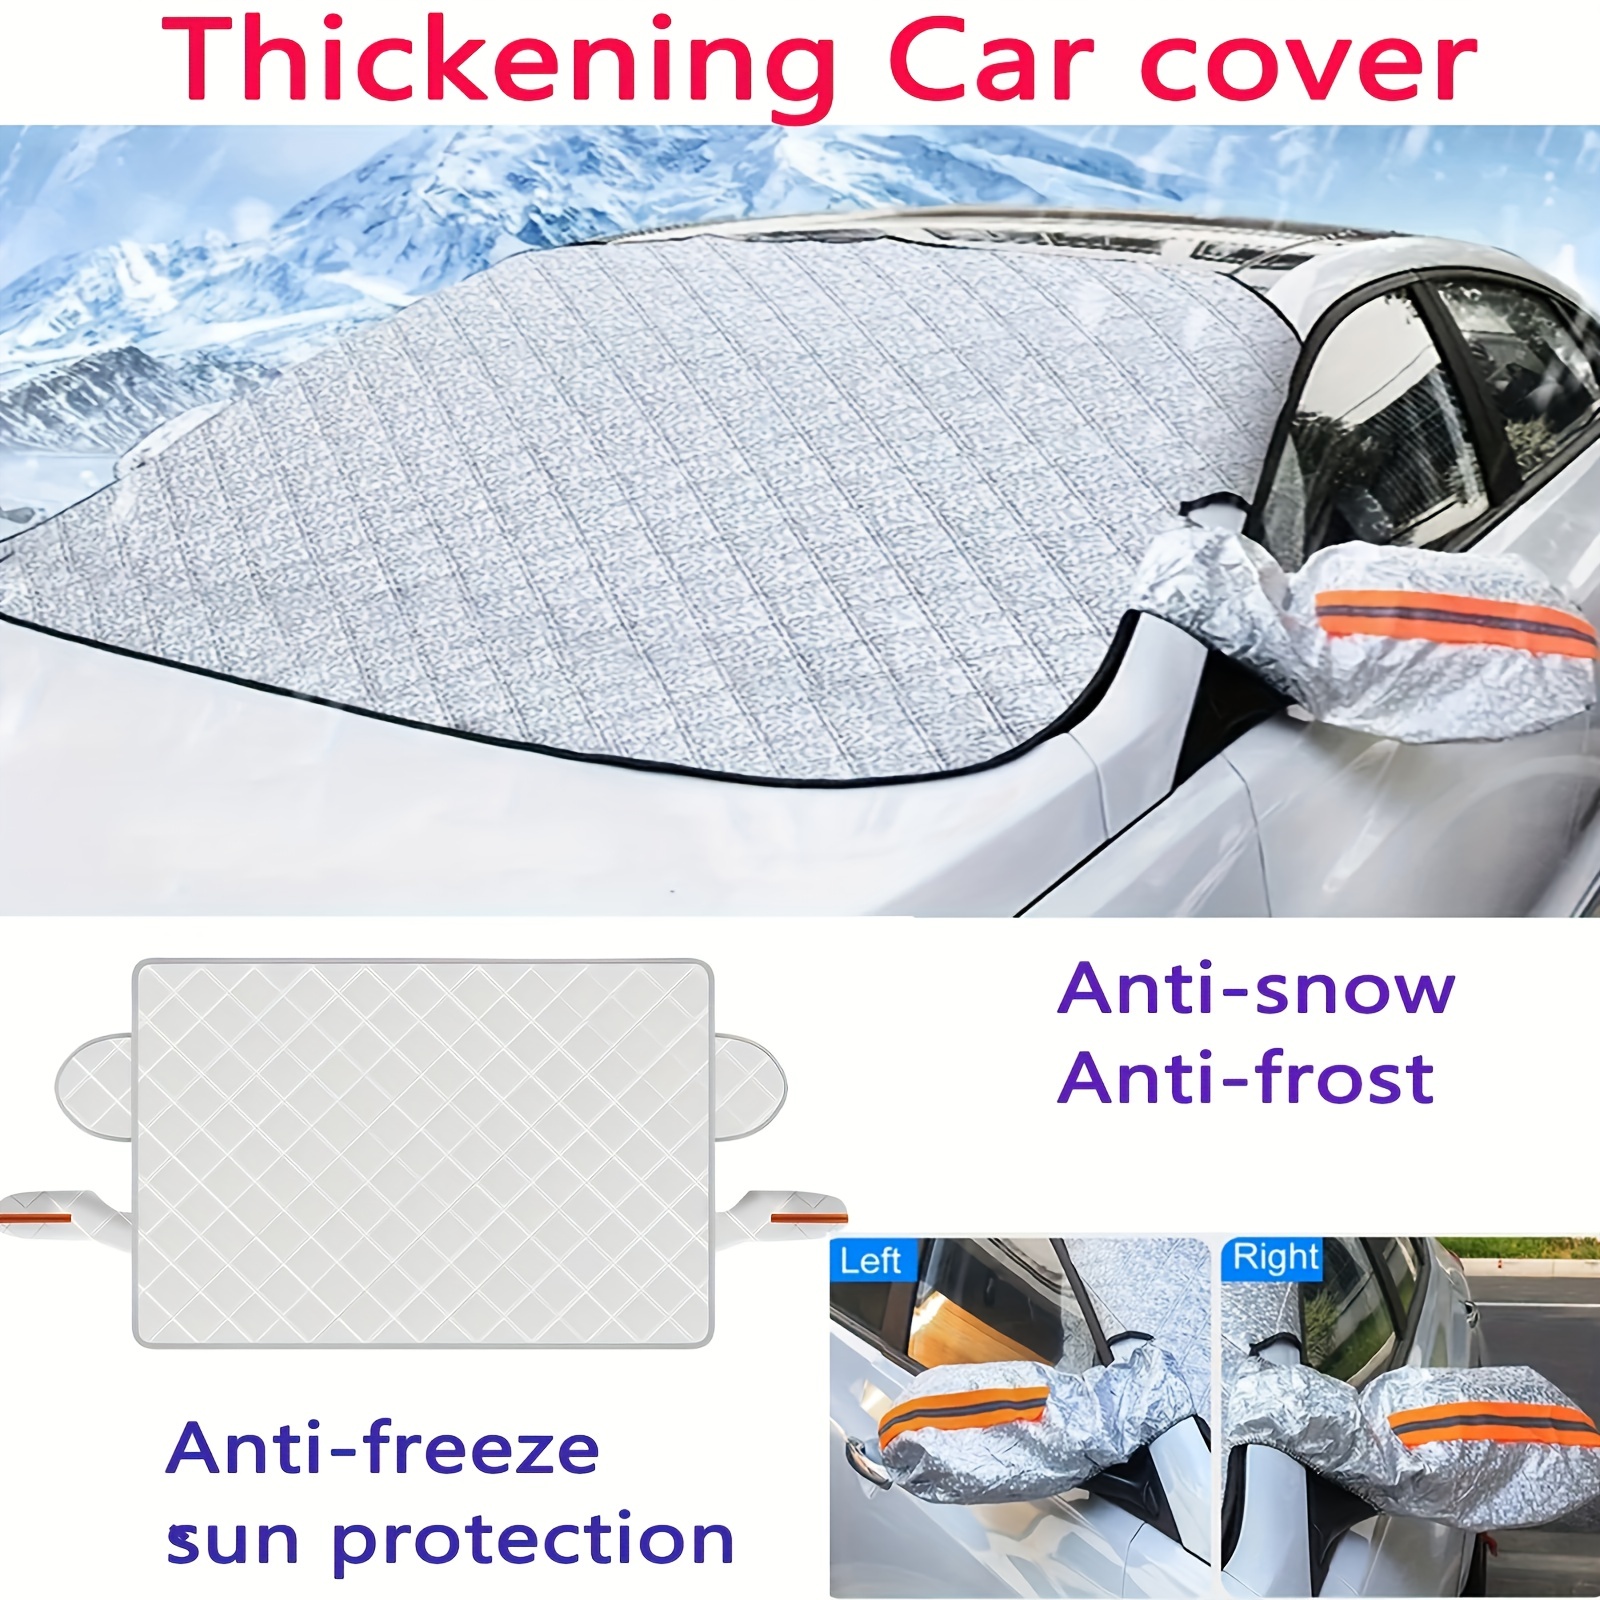 Car Rear Windshield Winter Sun Snow Ice Cover Waterproof Dustproof  Anti-frost Anti-fog UV Protection Cover Auto Accessories - AliExpress